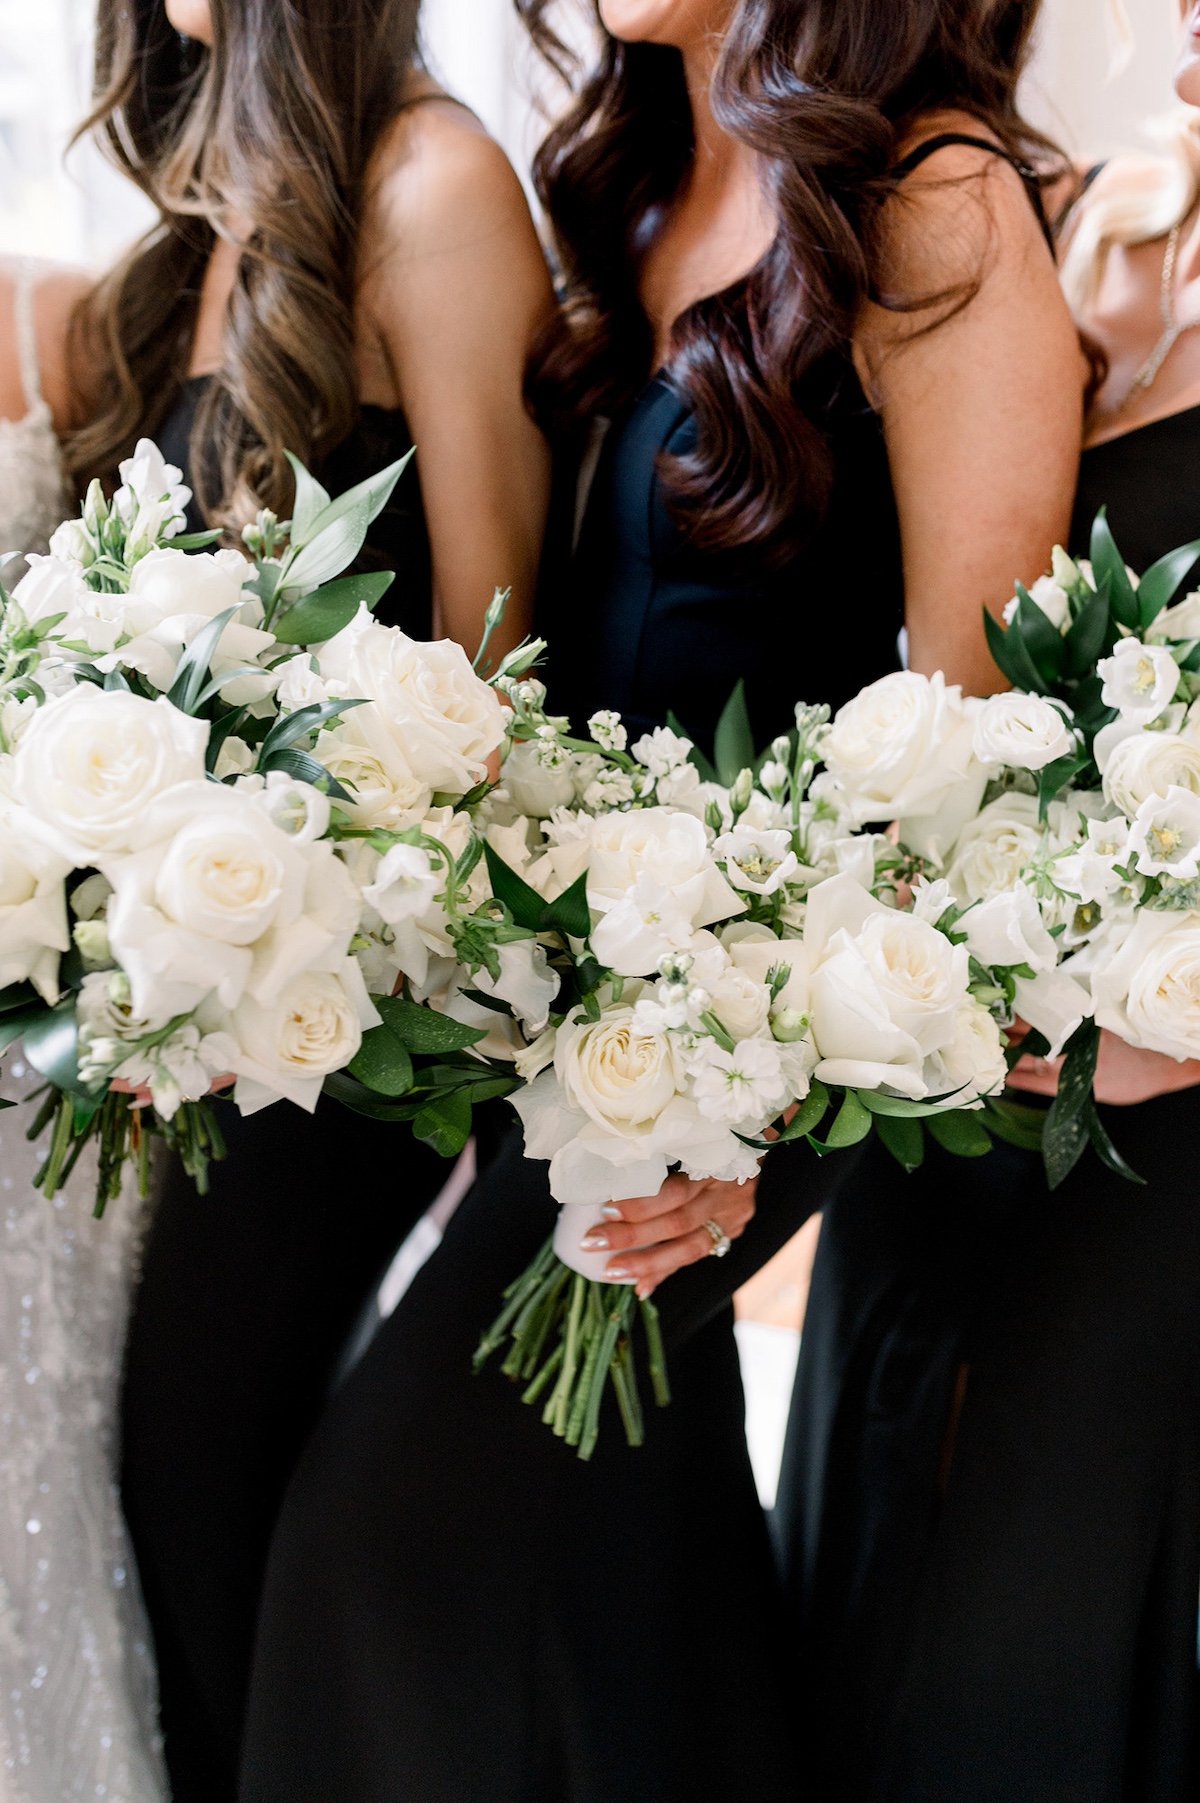 An editorial composition featuring bridesmaids arranging bouquets, a display of high-end floral sophistication.